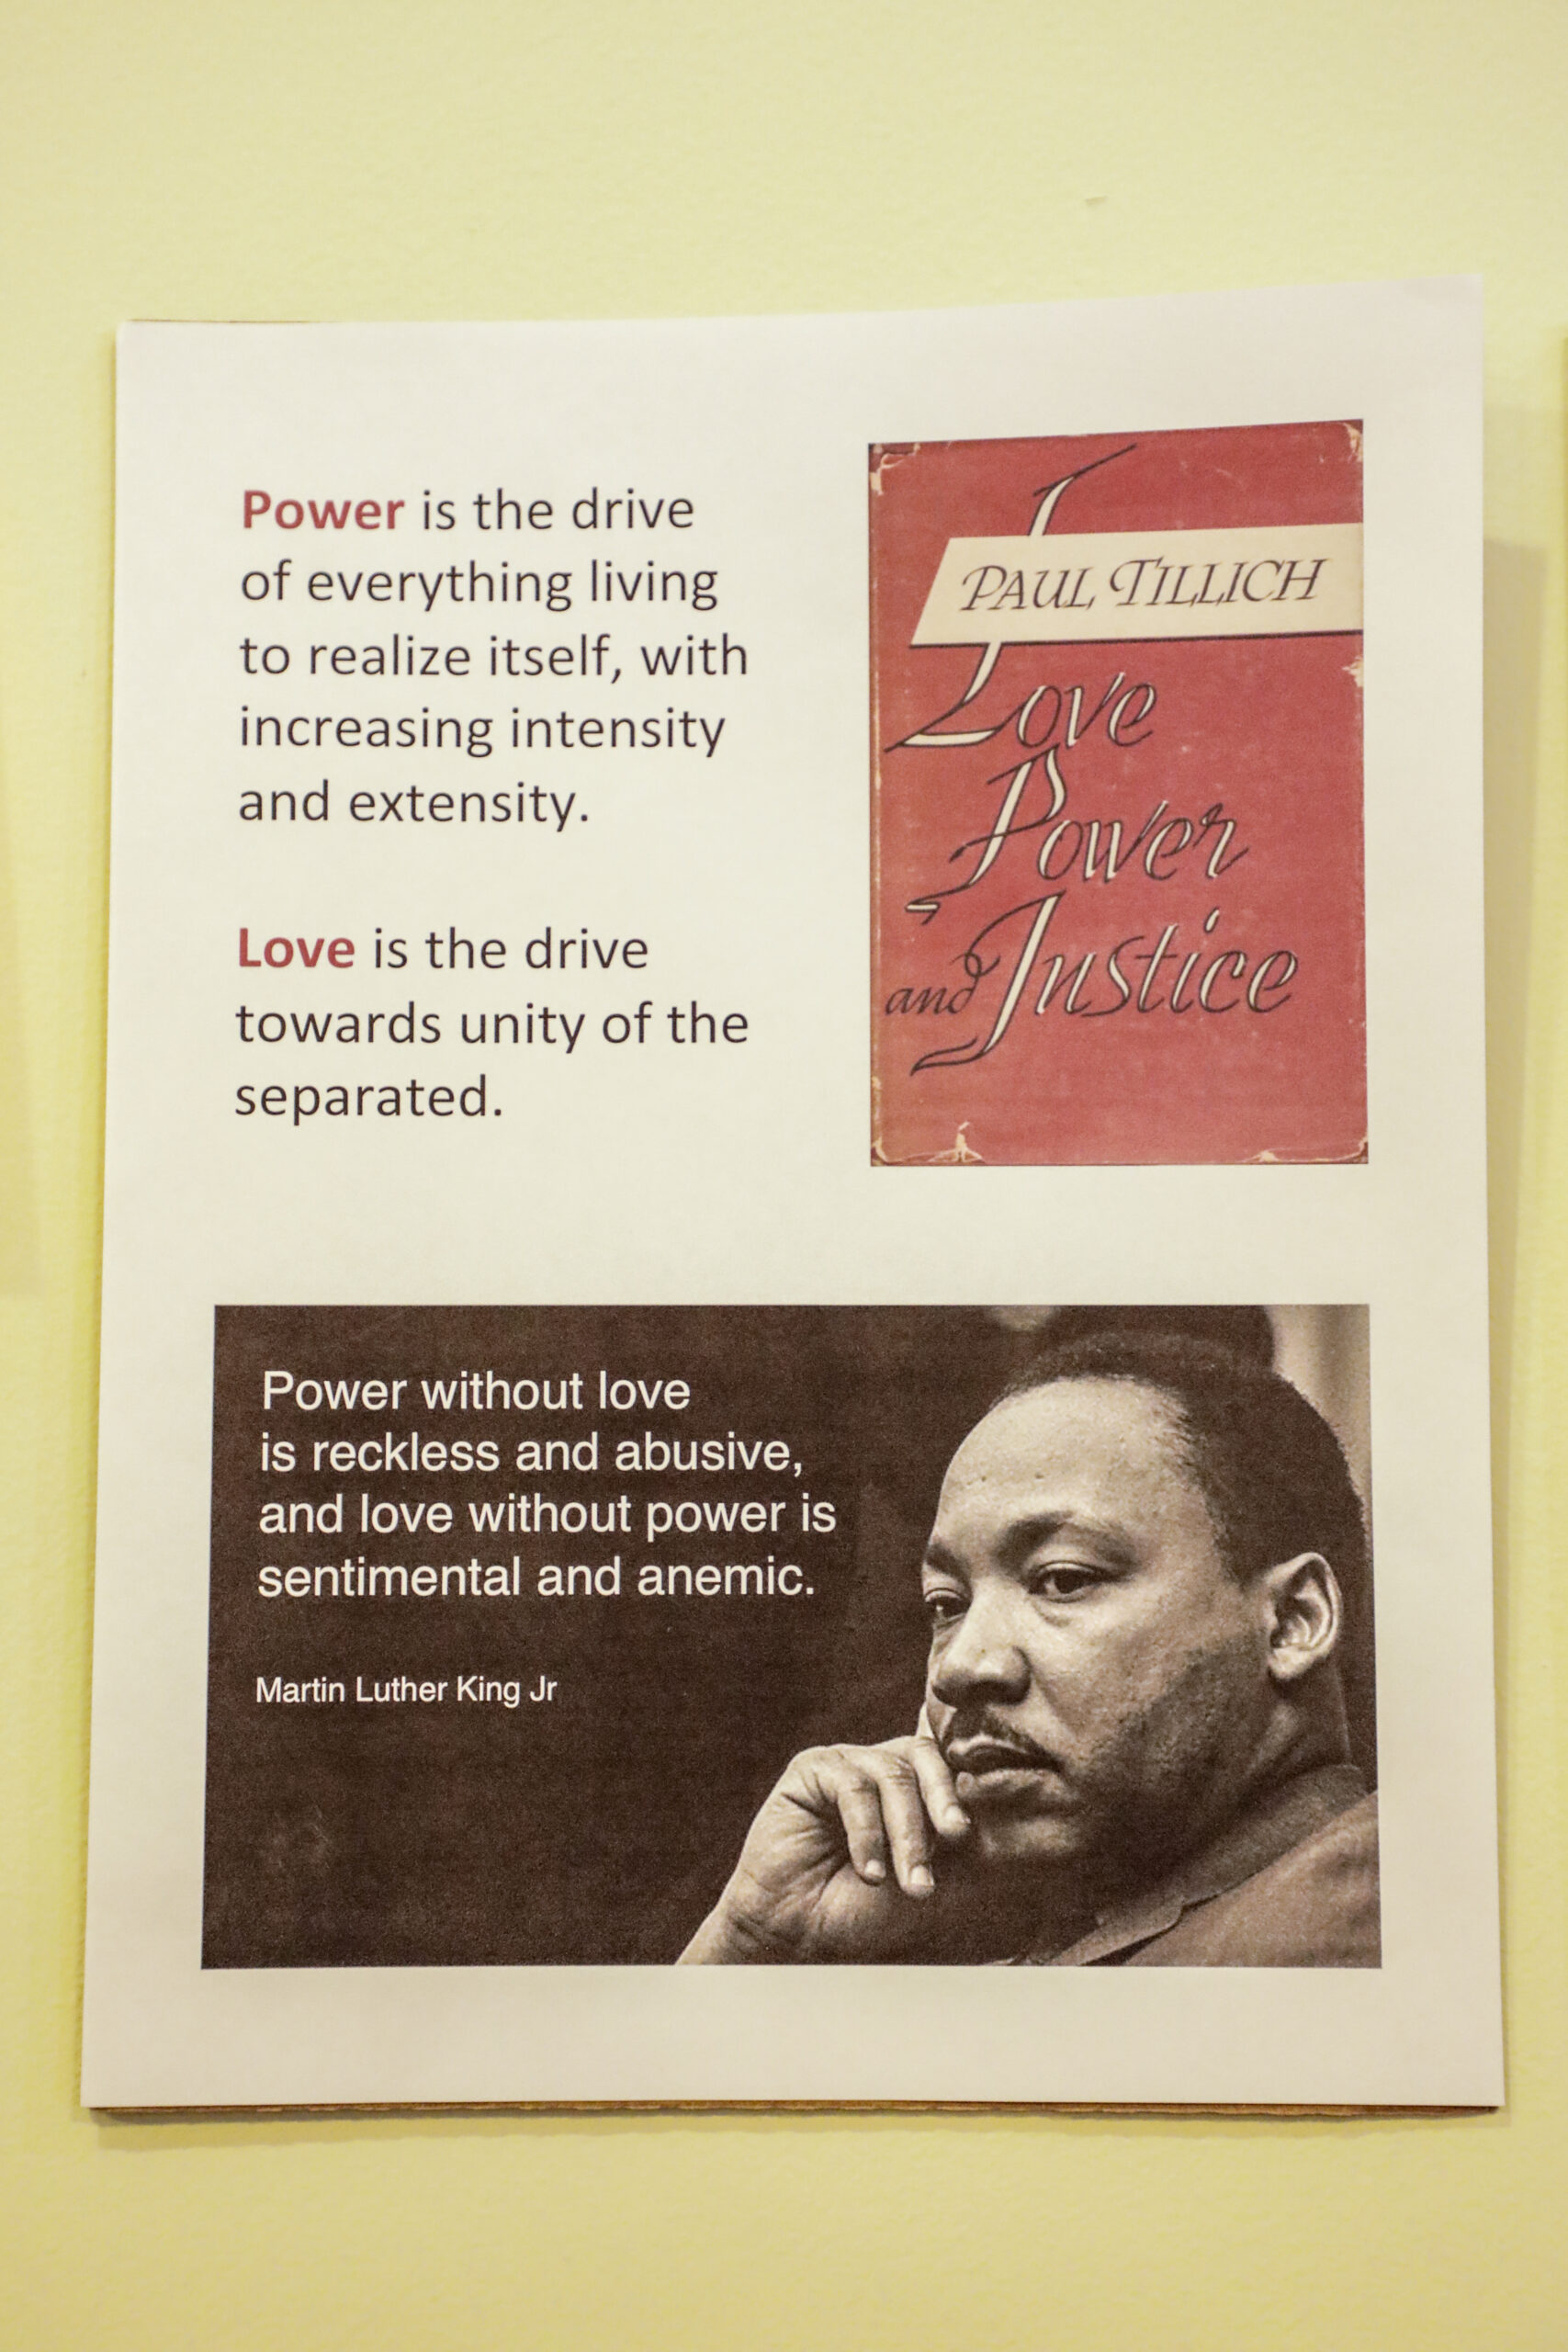 A little insA little inspiration: "Power without love is reckless and abusive. Love without power is sentimental and anemic." - MLK Jr. piration: "Power without ove is reckless and abusive. Love without power is sentimental and anemic." - MLK Jr.